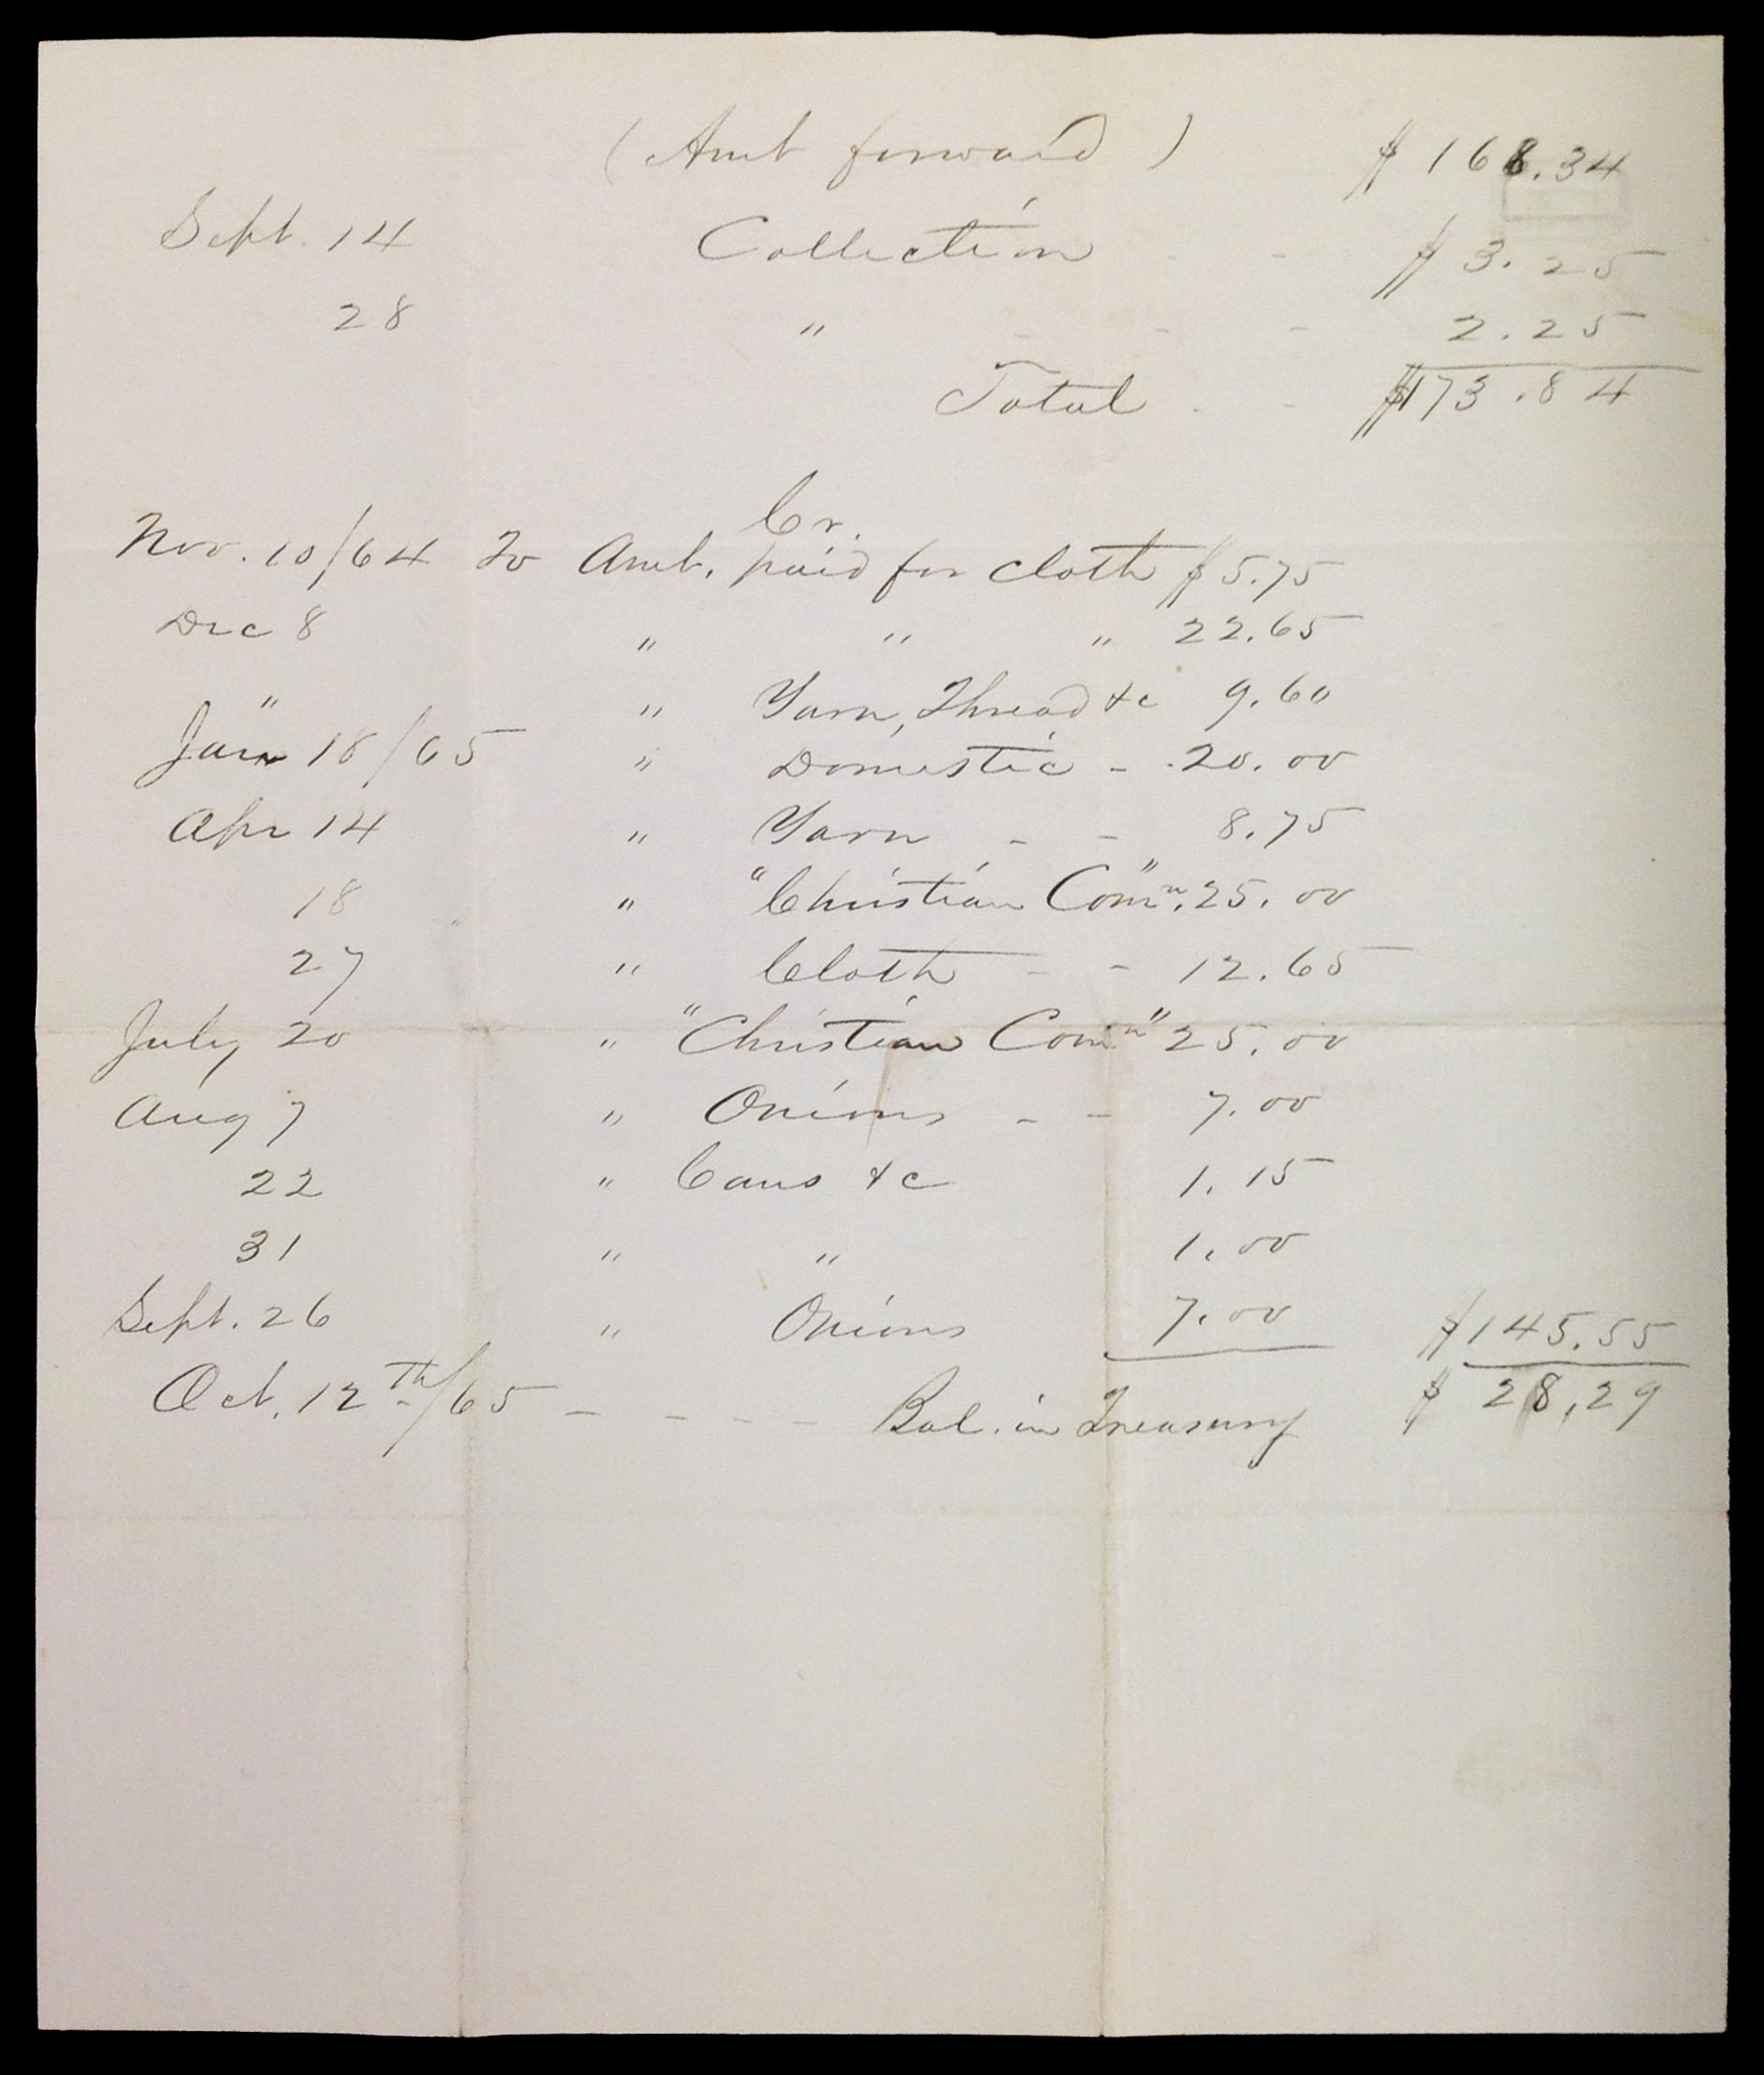 Treasurer's report for the Ladies' Union Aid Society of Upper Alton, 1864-1865.